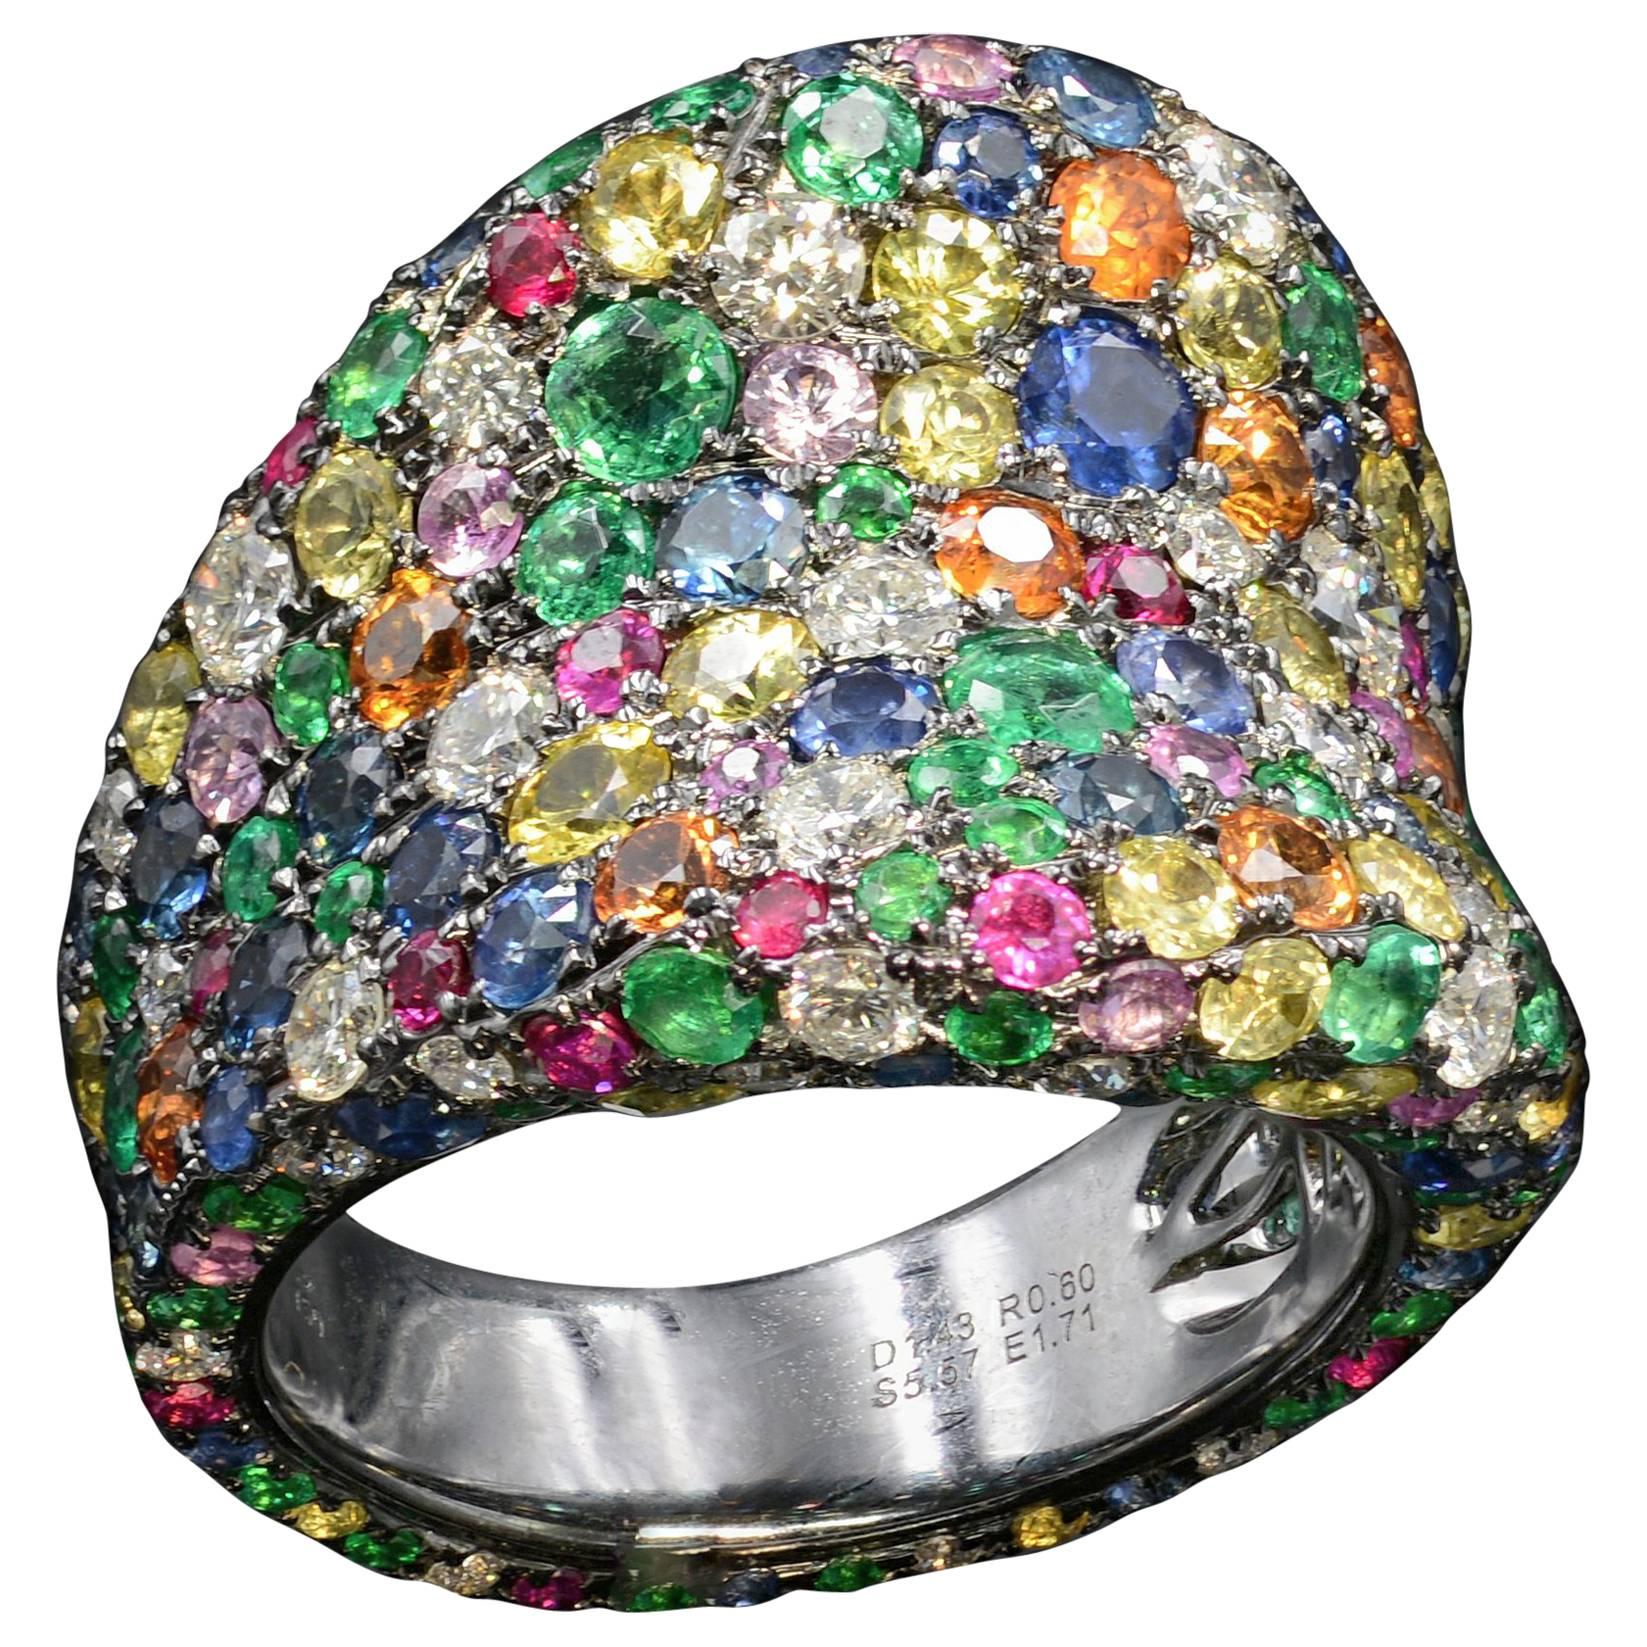 18K Gold Cocktail Ring featuring 5.83 Carats of Diamonds and Precious Gemstones For Sale